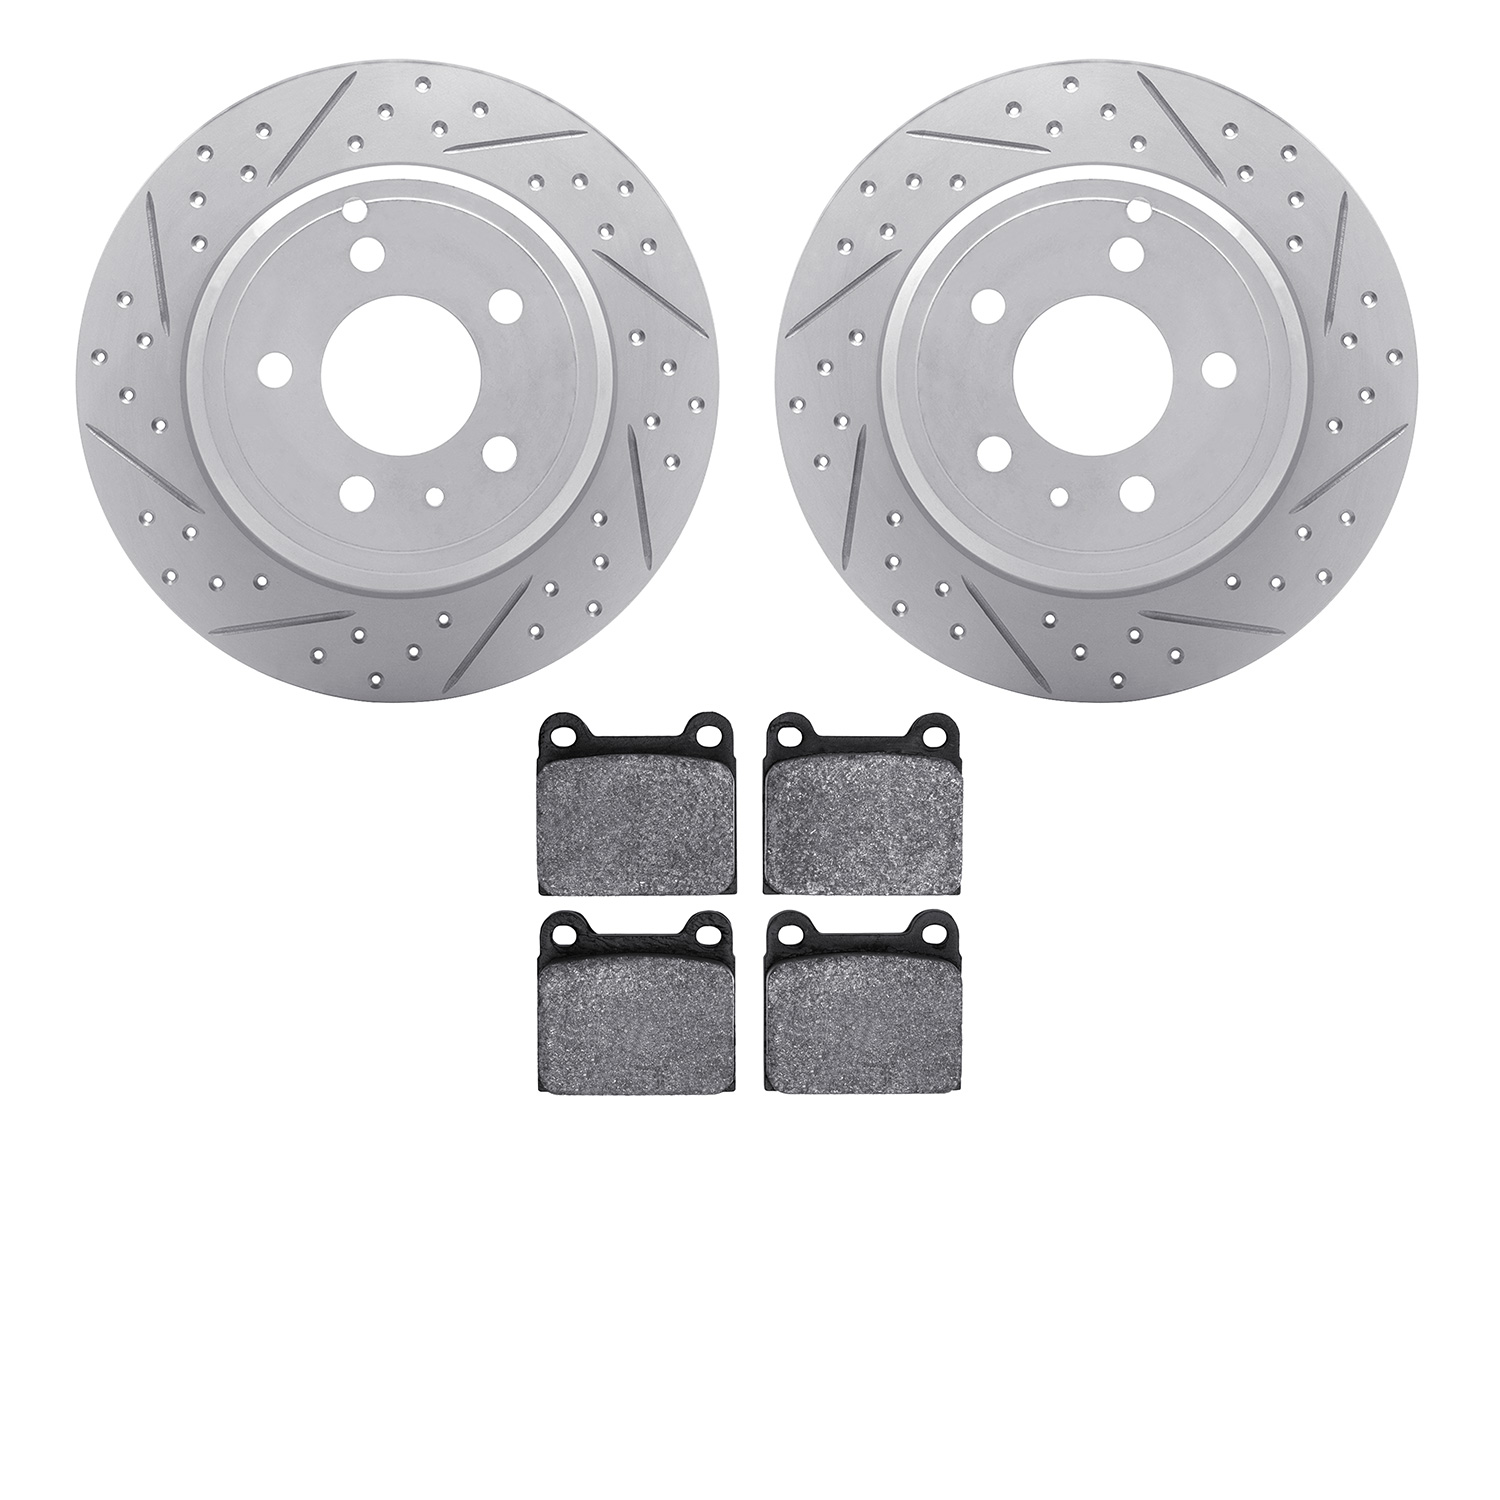 2502-27008 Geoperformance Drilled/Slotted Rotors w/5000 Advanced Brake Pads Kit, 1996-2004 Volvo, Position: Rear